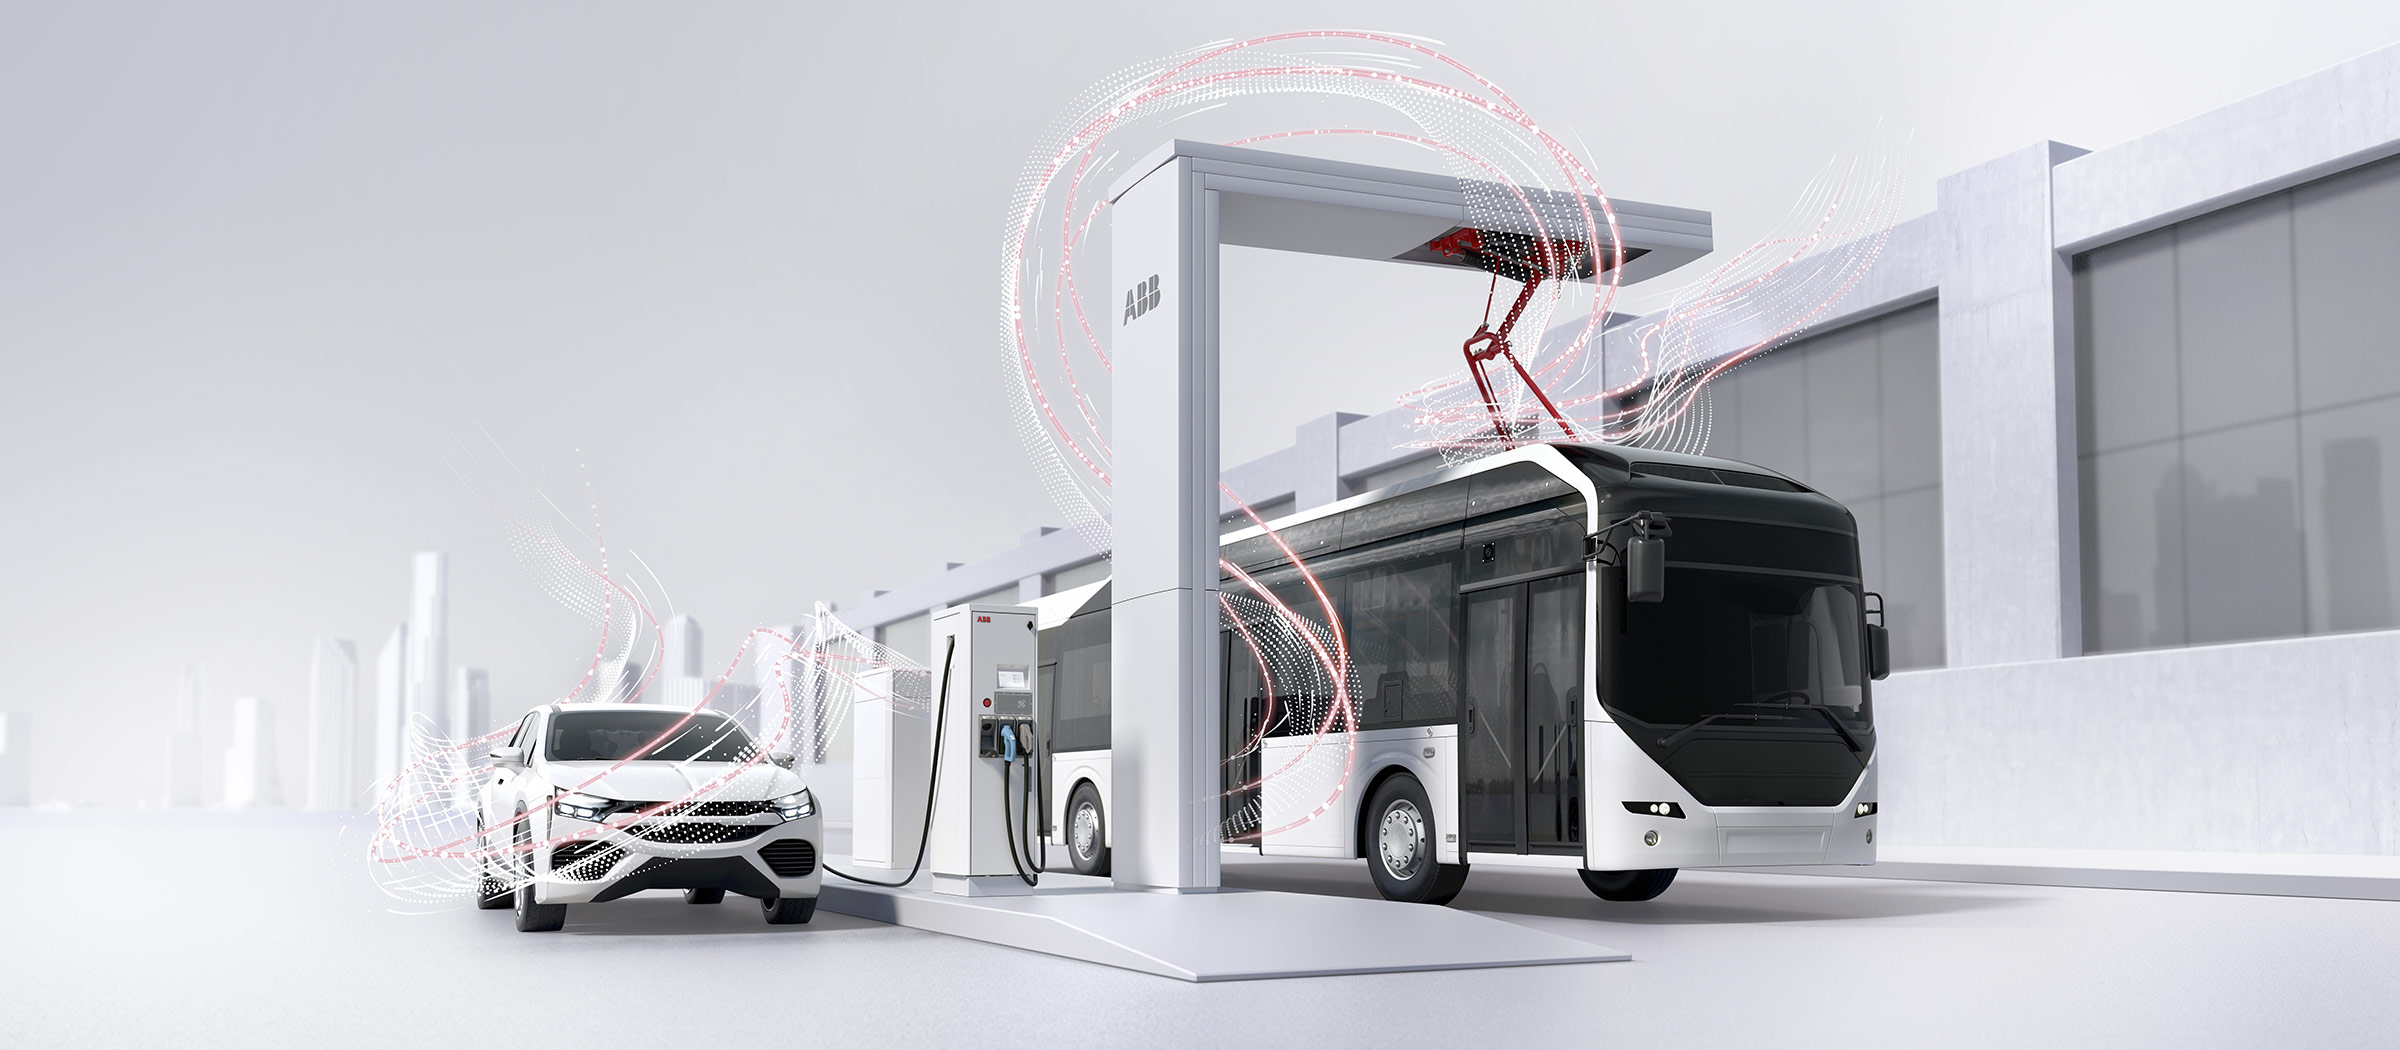 ABB TOSA – A new generation of buses – at energy station (photo)